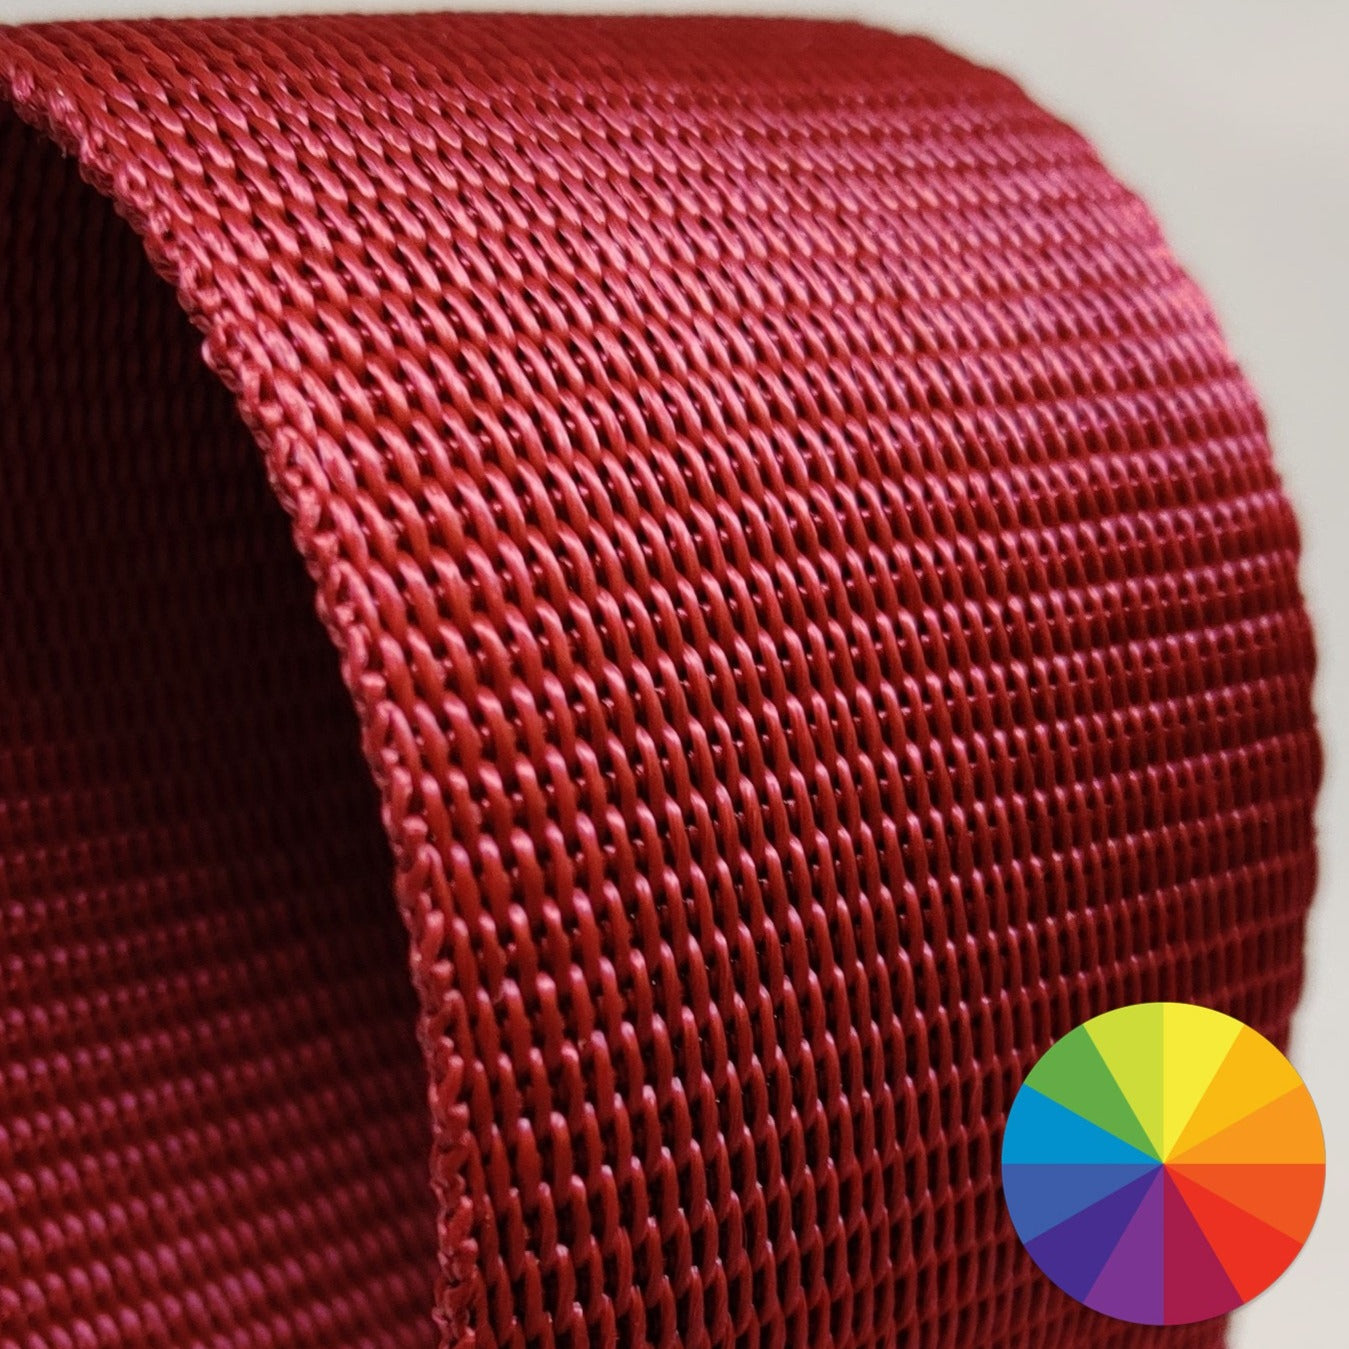 High-quality, robust webbing made of polypropylene - made in Germanny